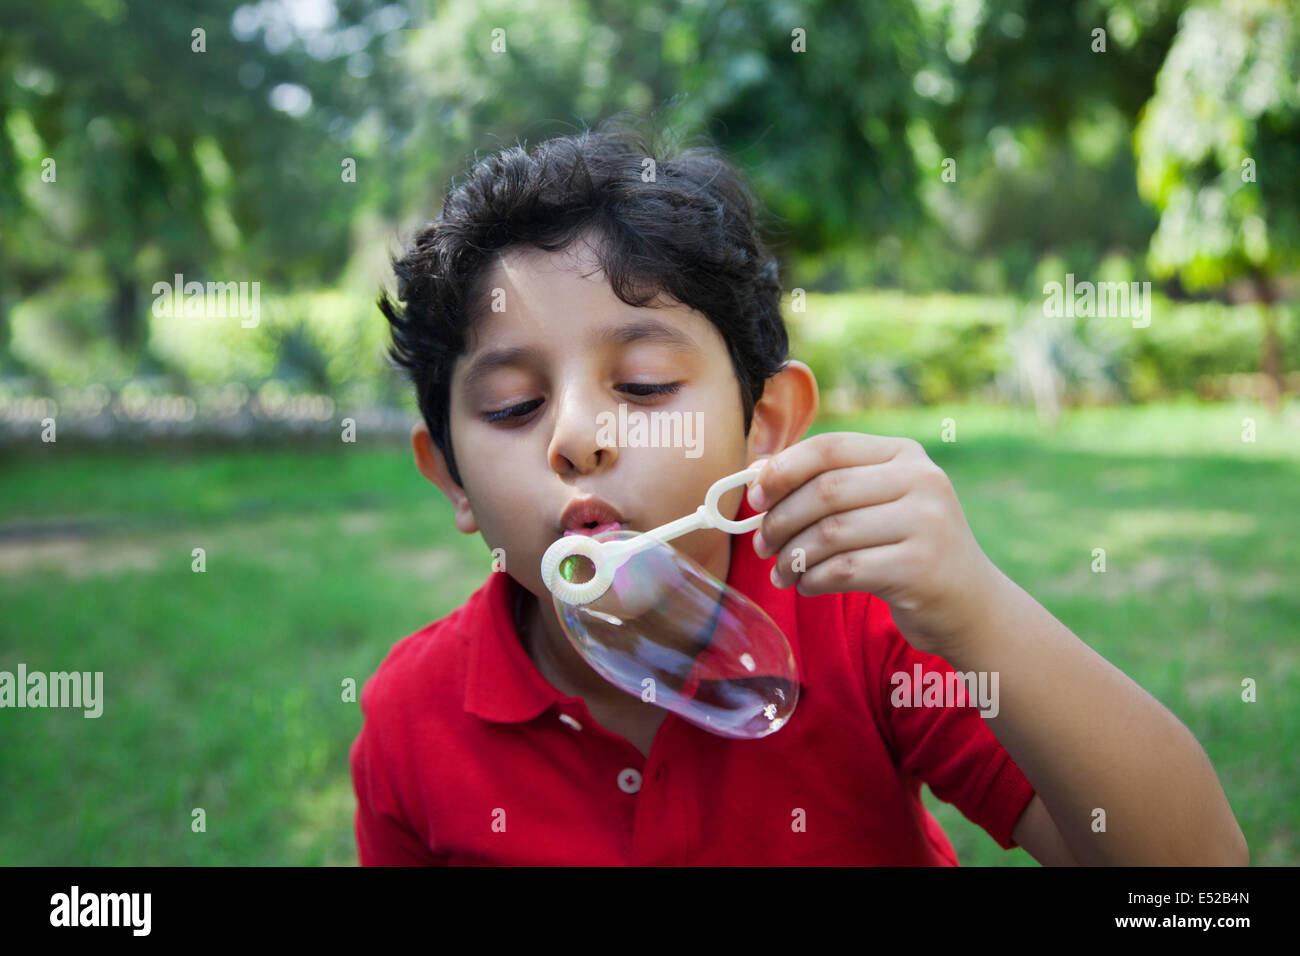 Young boy blowing bubbles Stock Photo